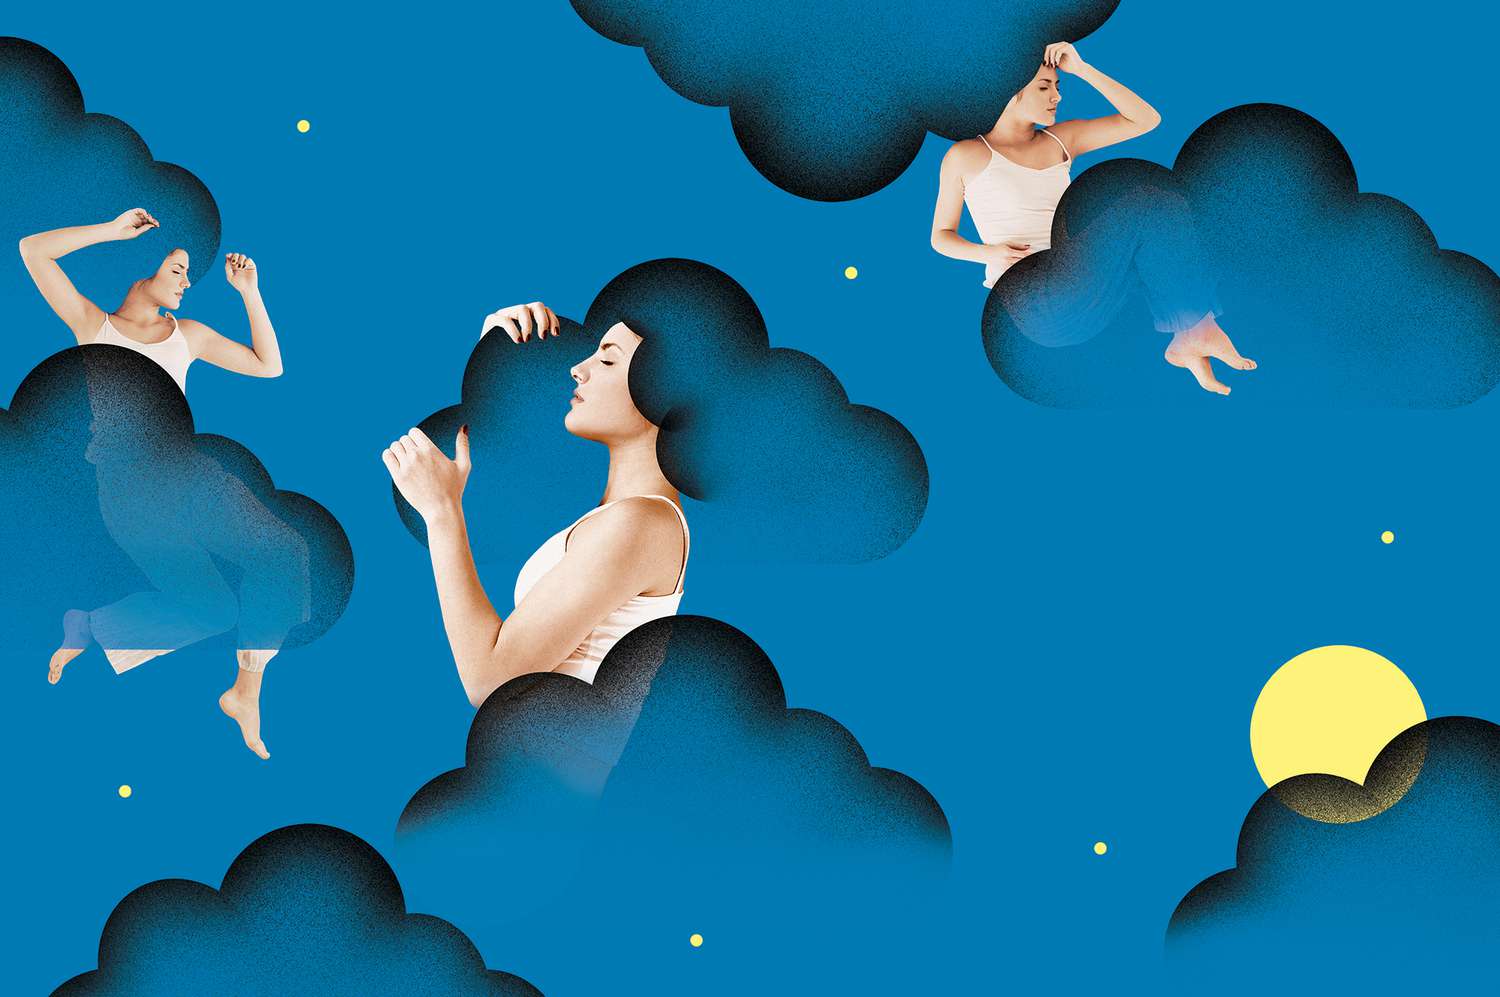 A composite image of a woman sleeping in illustrated clouds in a night sky